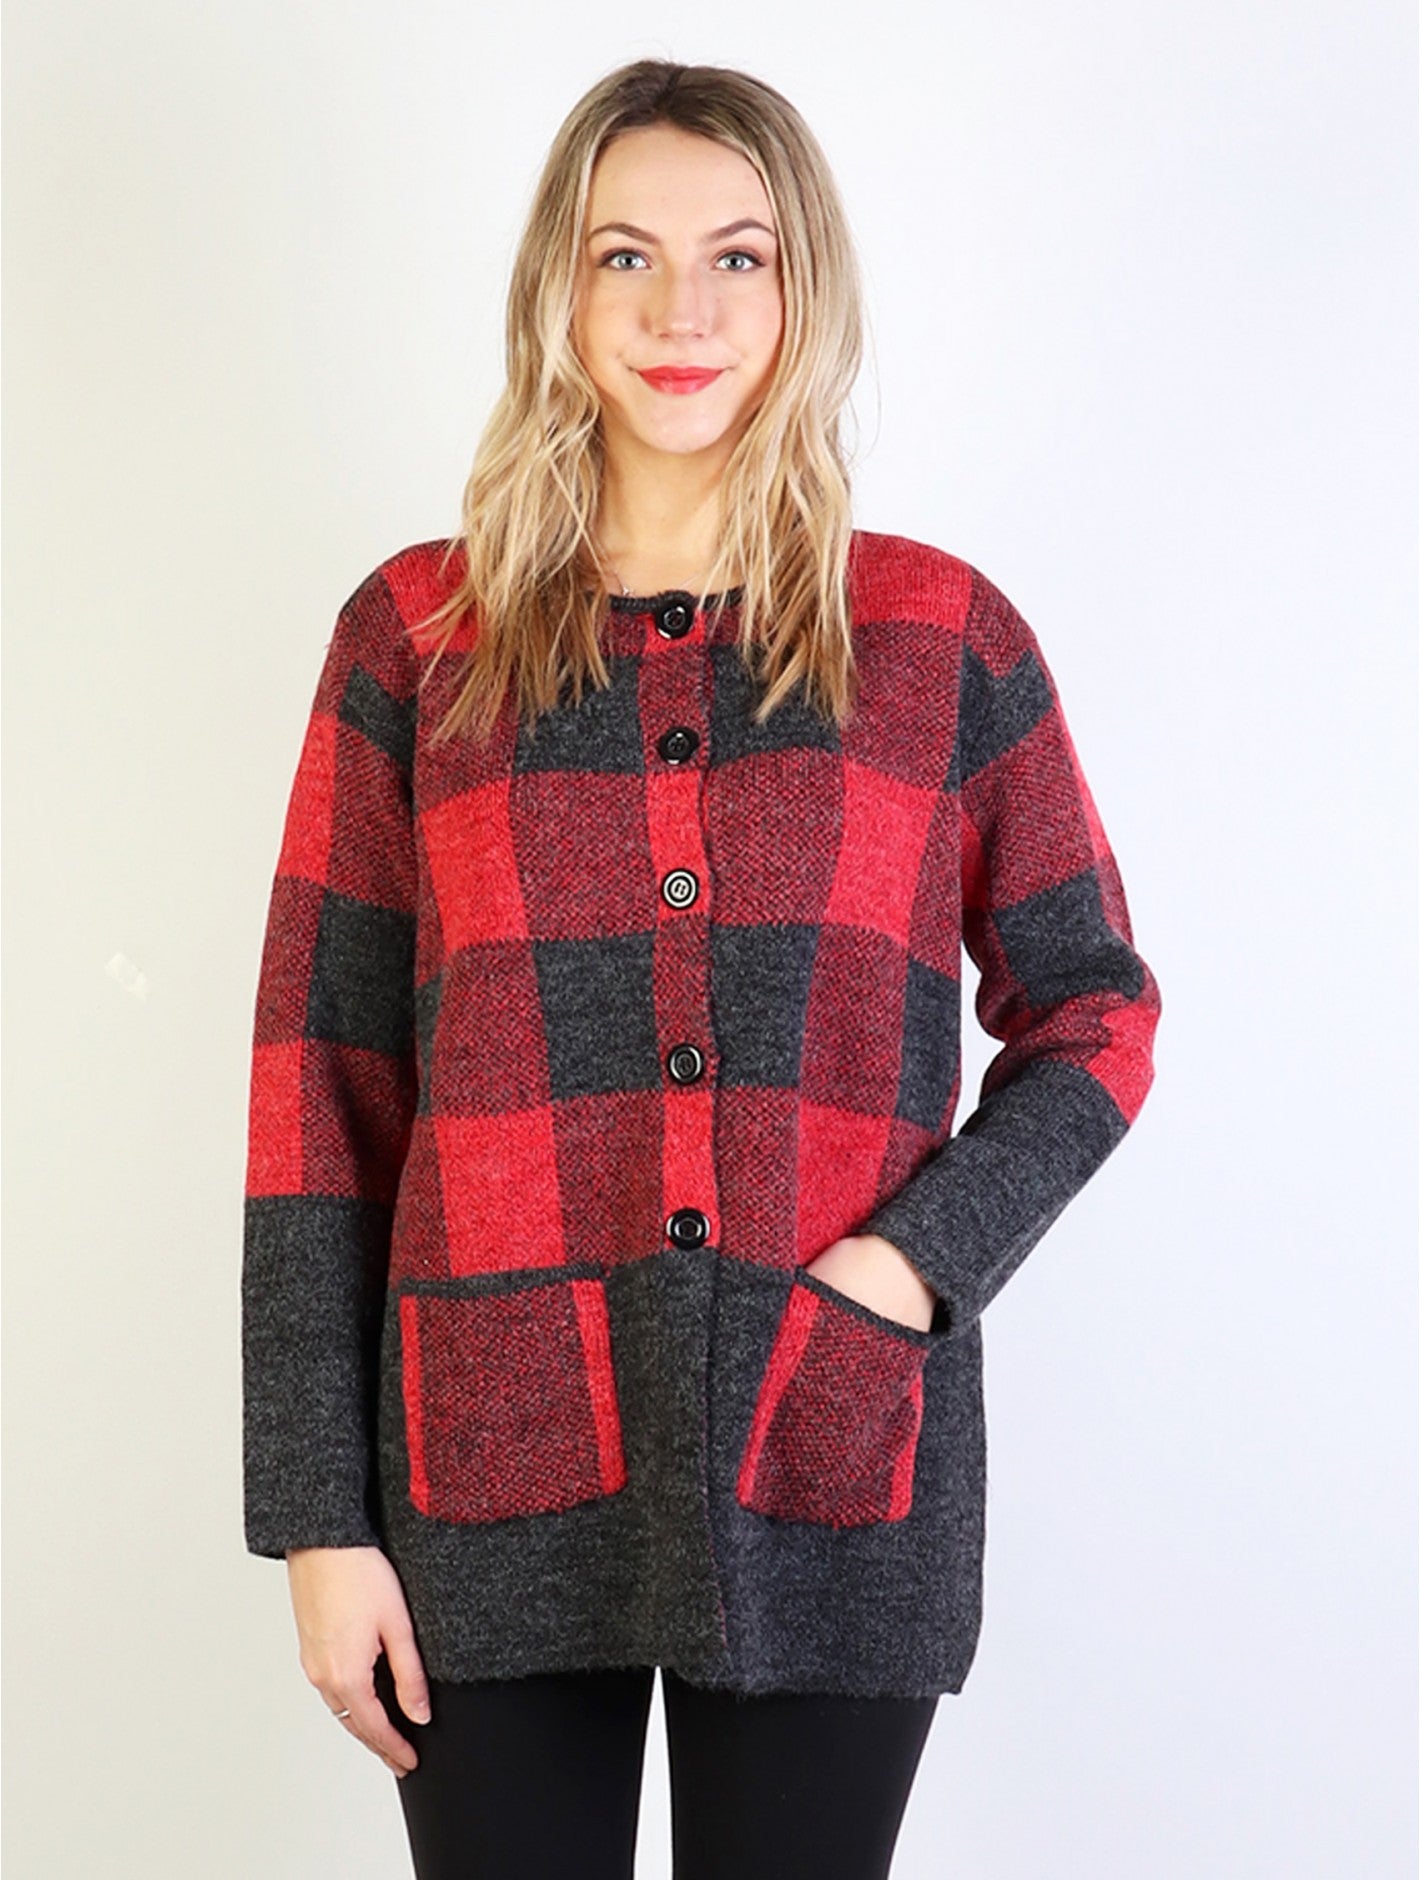 Top - Plaid Sweater w/ Buttons